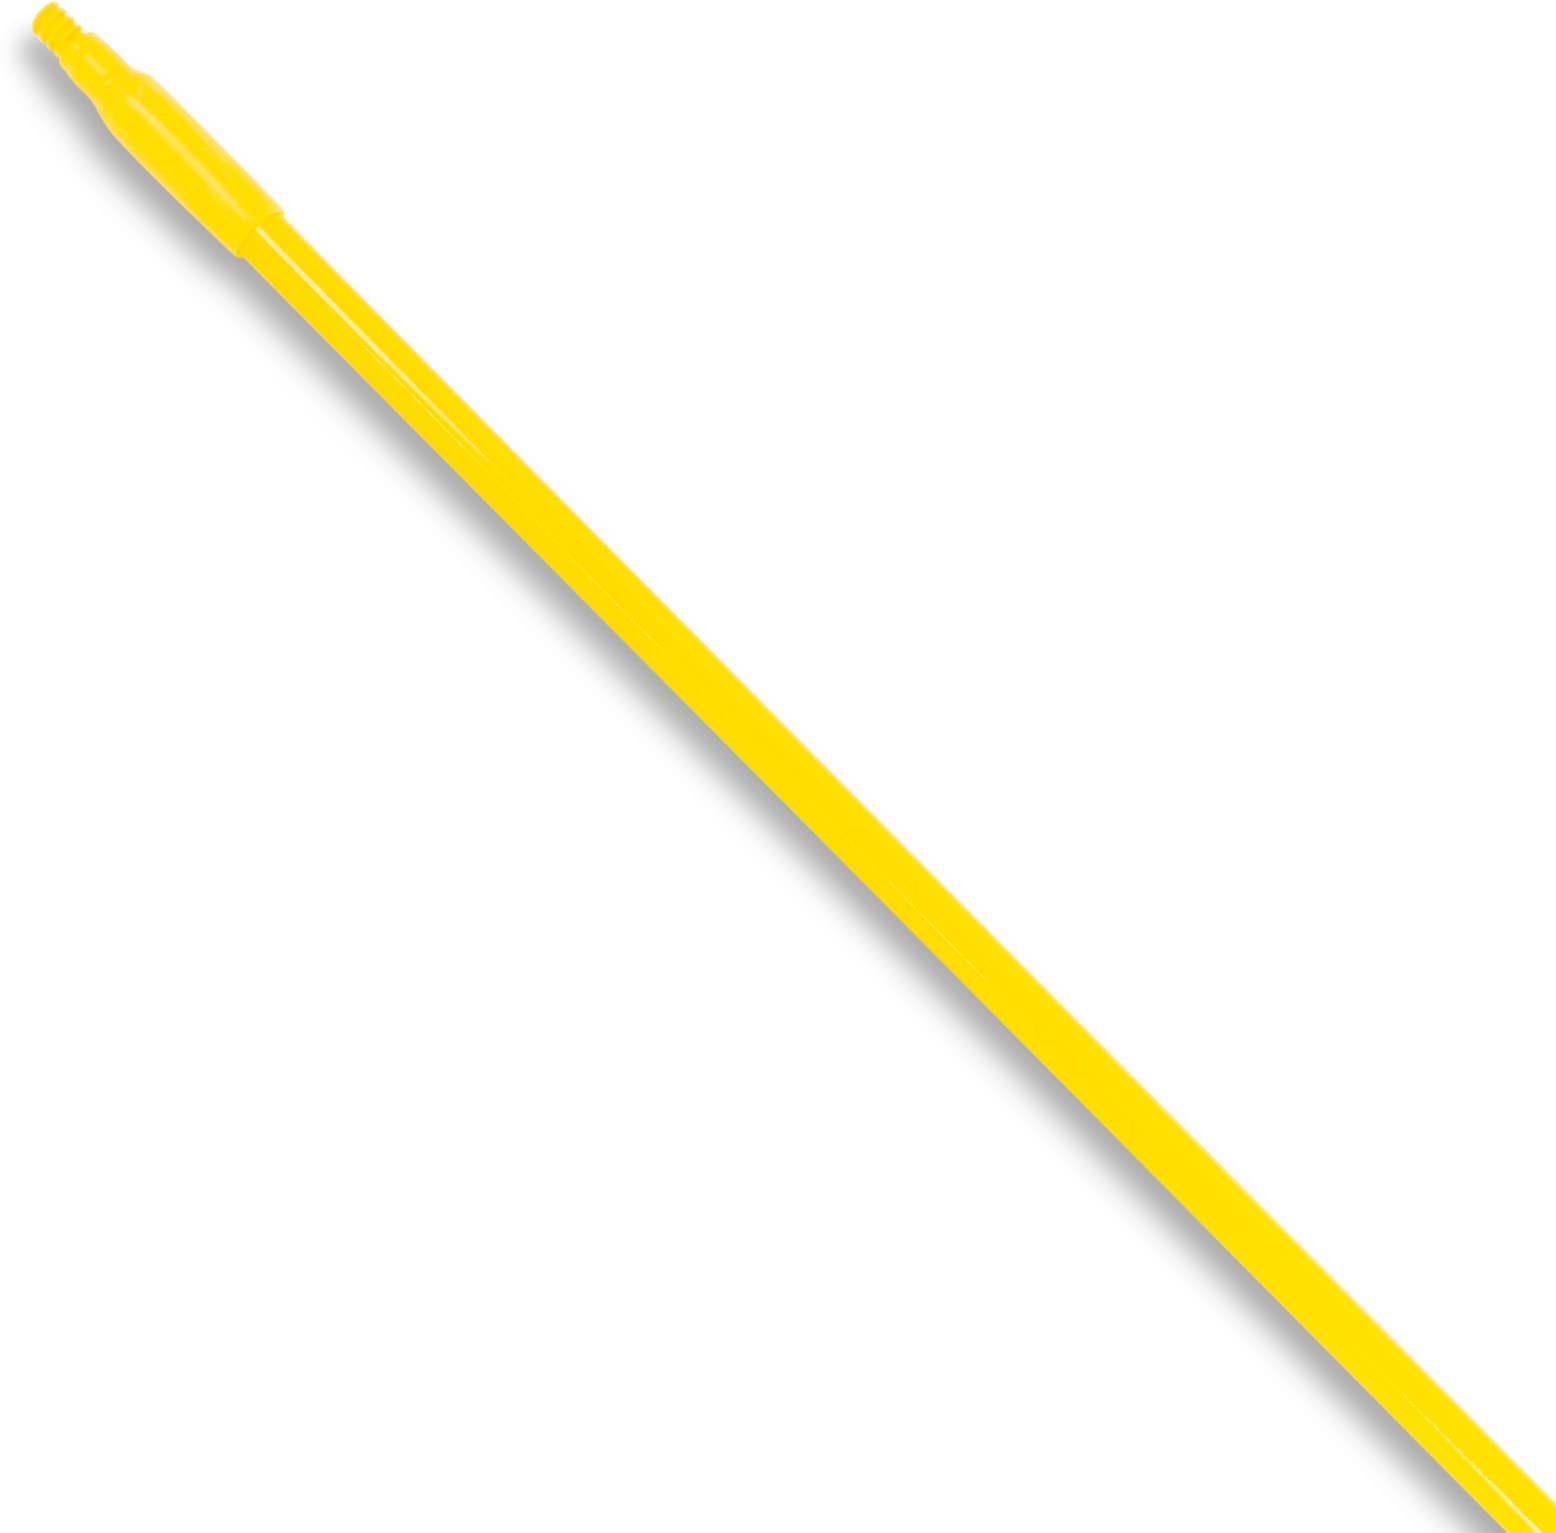 SPARTA Fiberglass Broomstick Replacement Broom Handle with Acme Threaded Tip for Industrial Cleaning Tools, Fiberglass, 60 Inches, Yellow